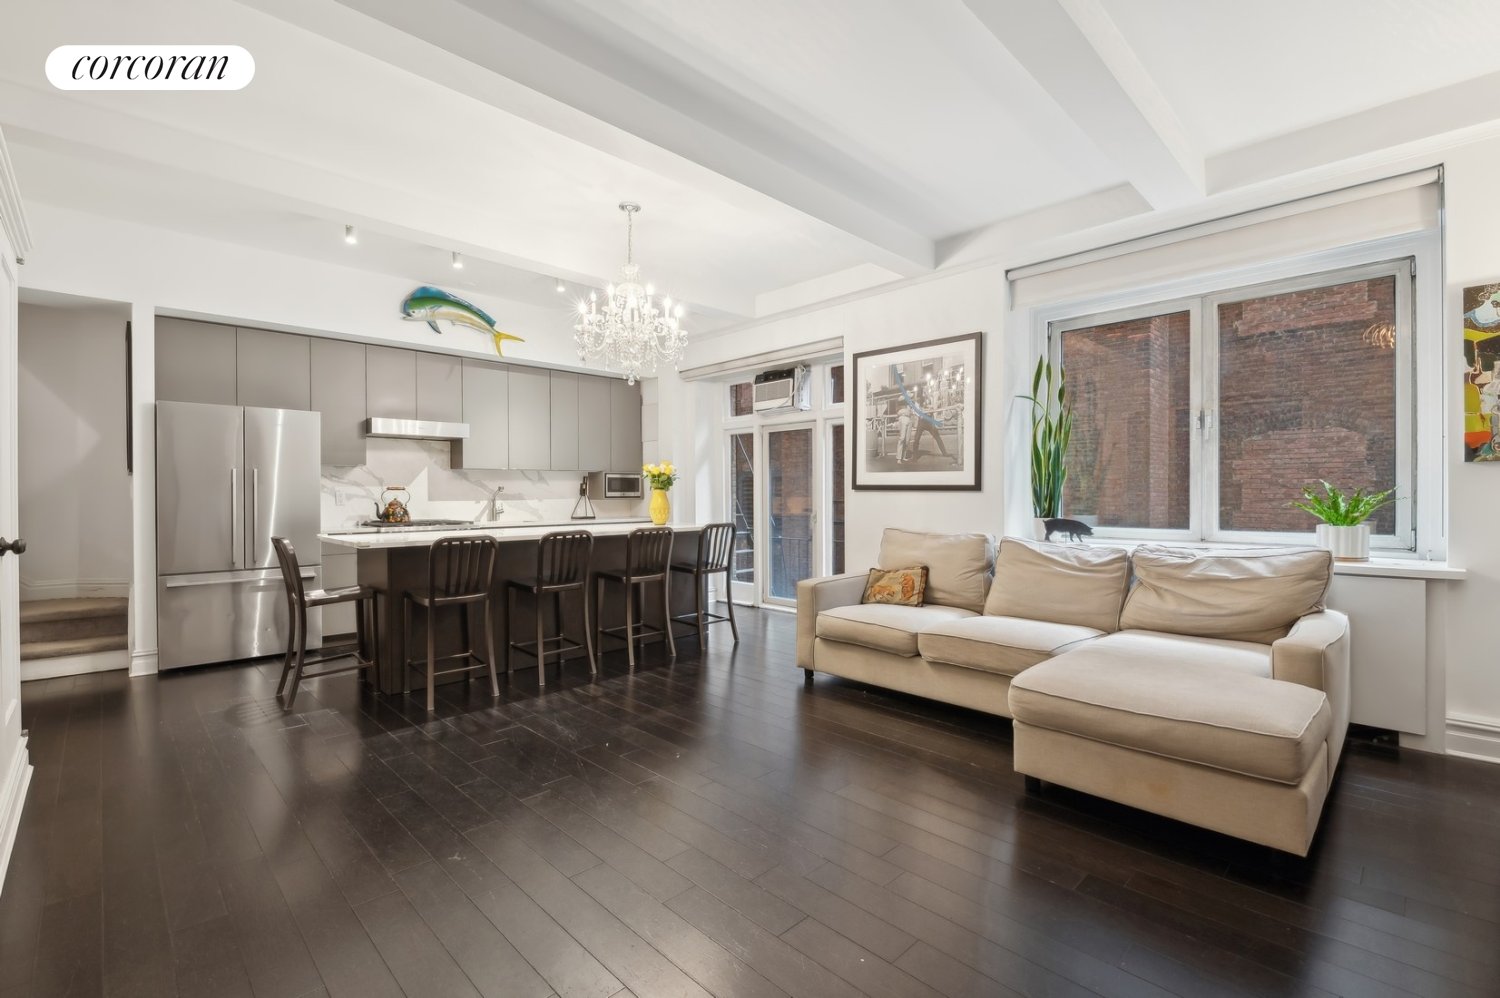 2 West 67th Street 2/3F, Lincoln Sq, Upper West Side, NYC - 2 Bedrooms  
1.5 Bathrooms  
4 Rooms - 